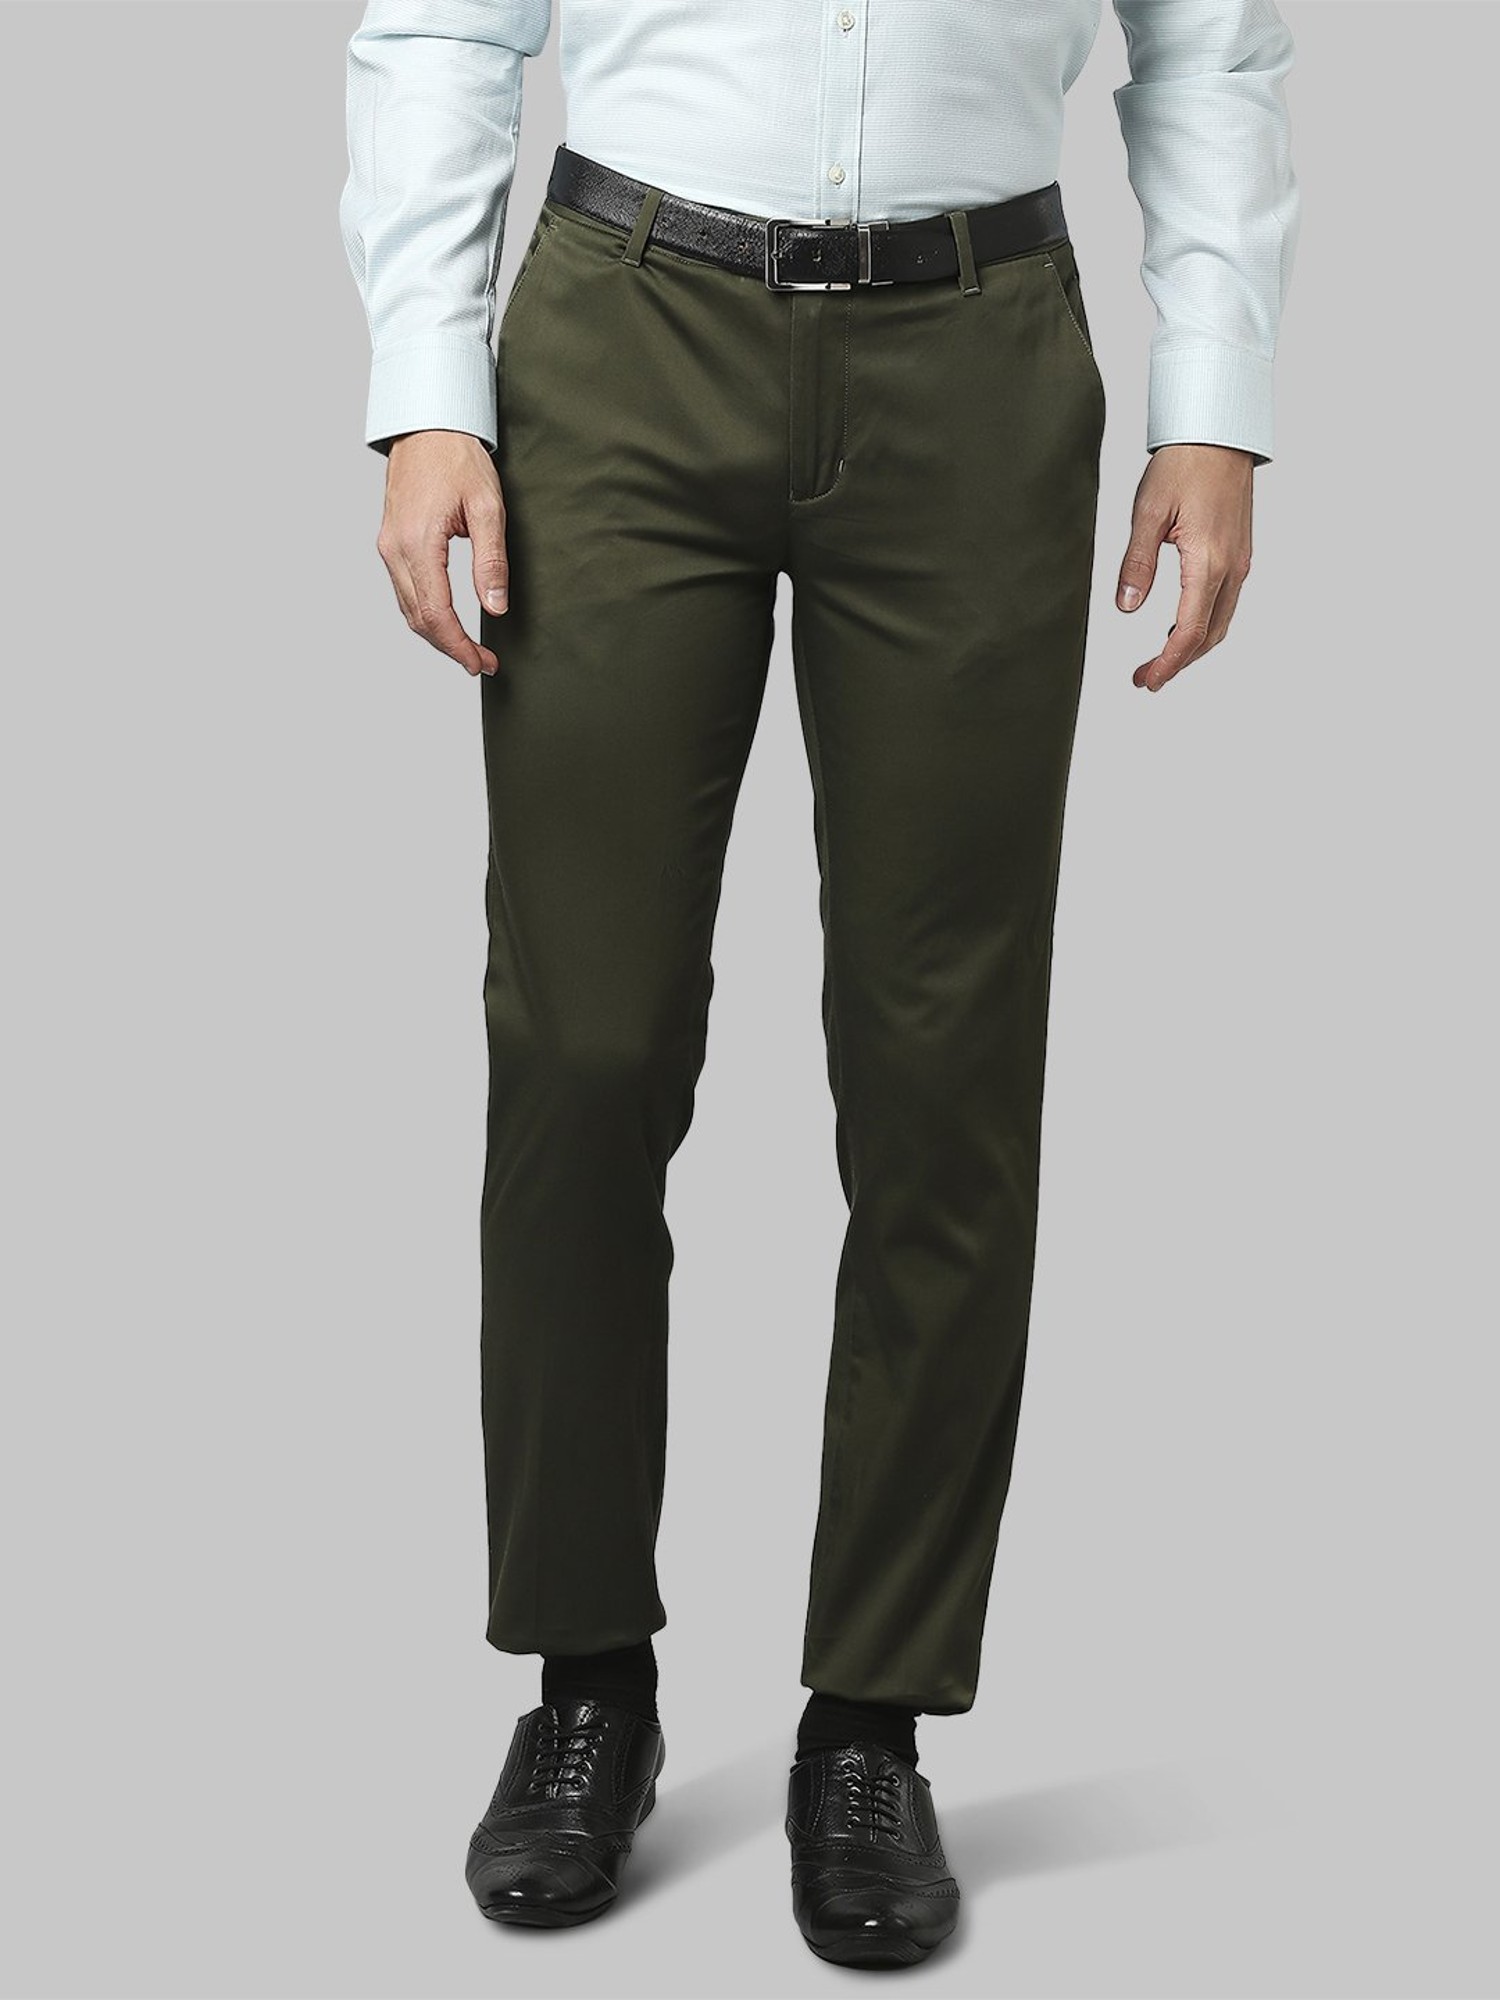 PLAYERS Mens Slim Fit Formal Trouser Combo Olive Green  Beige